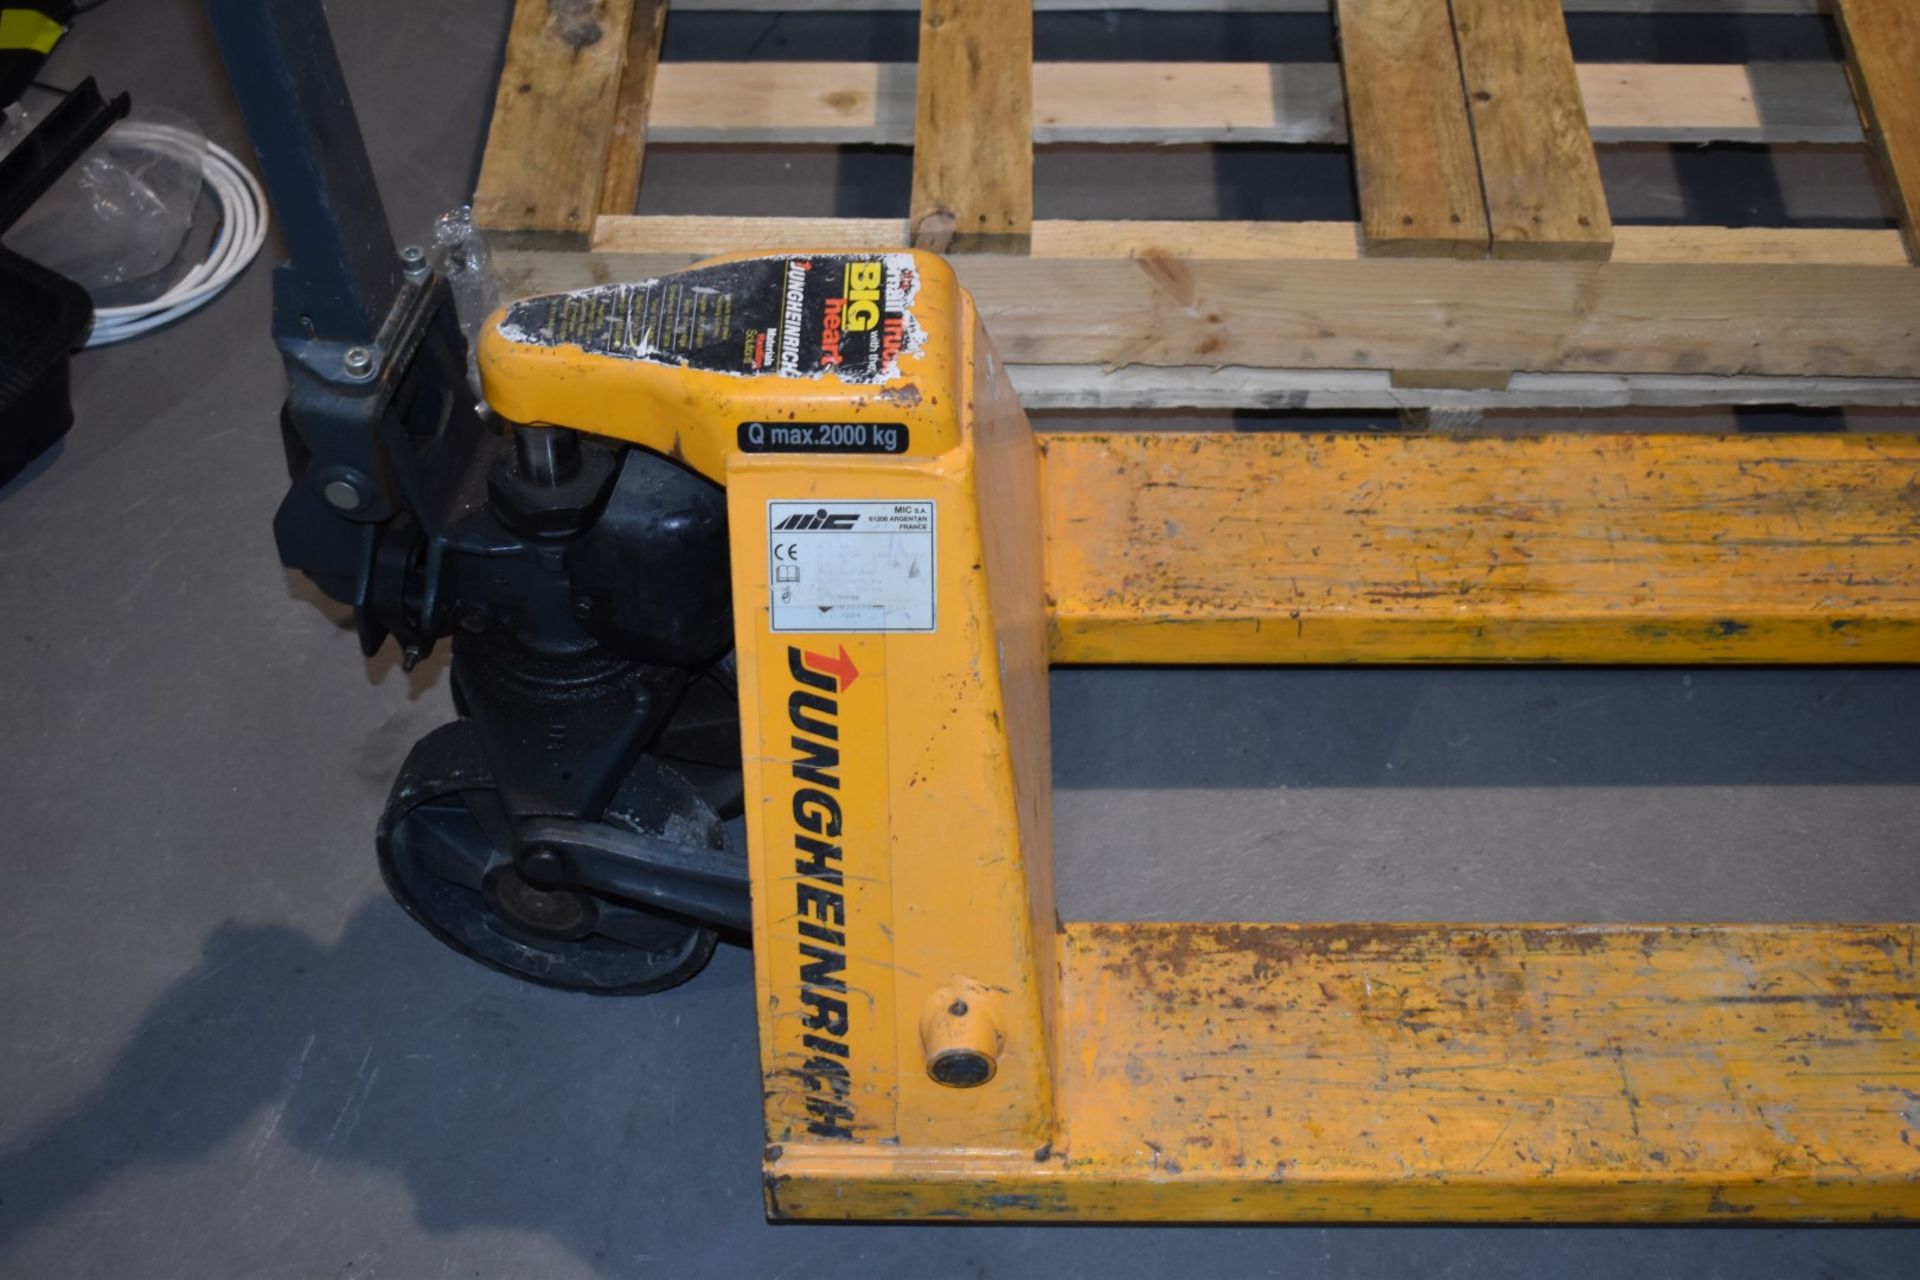 1 x Jungheinrich Pallet Pump Truck Suitable For UK or Euro Pallets PME340 - Image 4 of 5